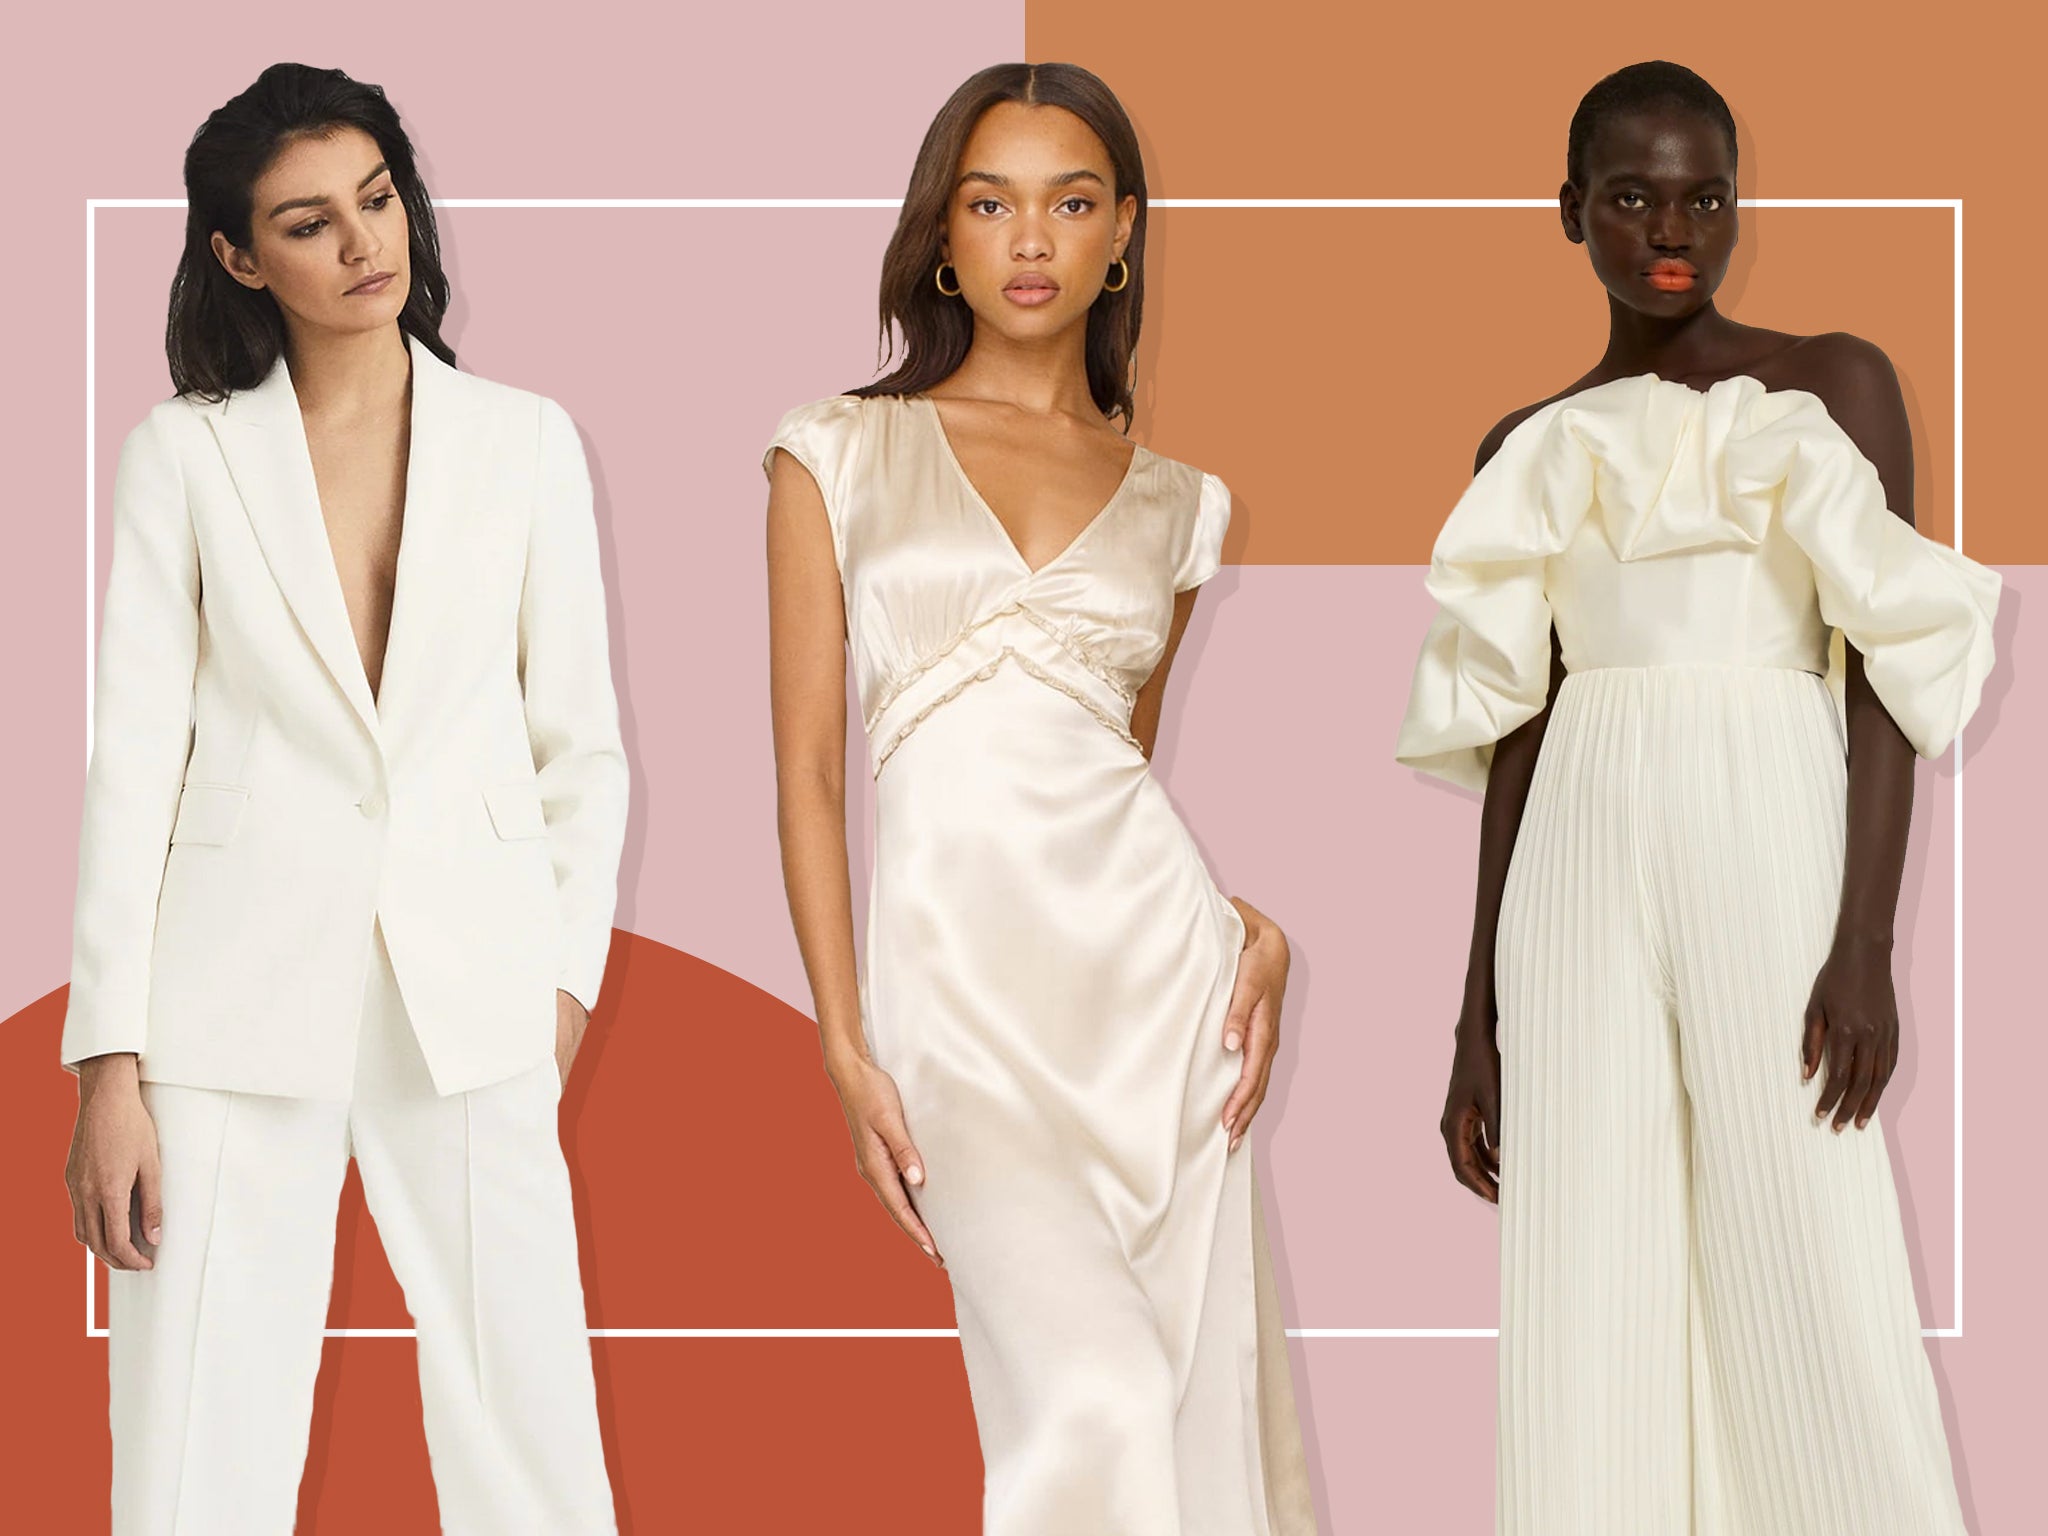 Following the lead of A-listers opting for smaller nuptials? Try one of these looks, from mini dresses to separates